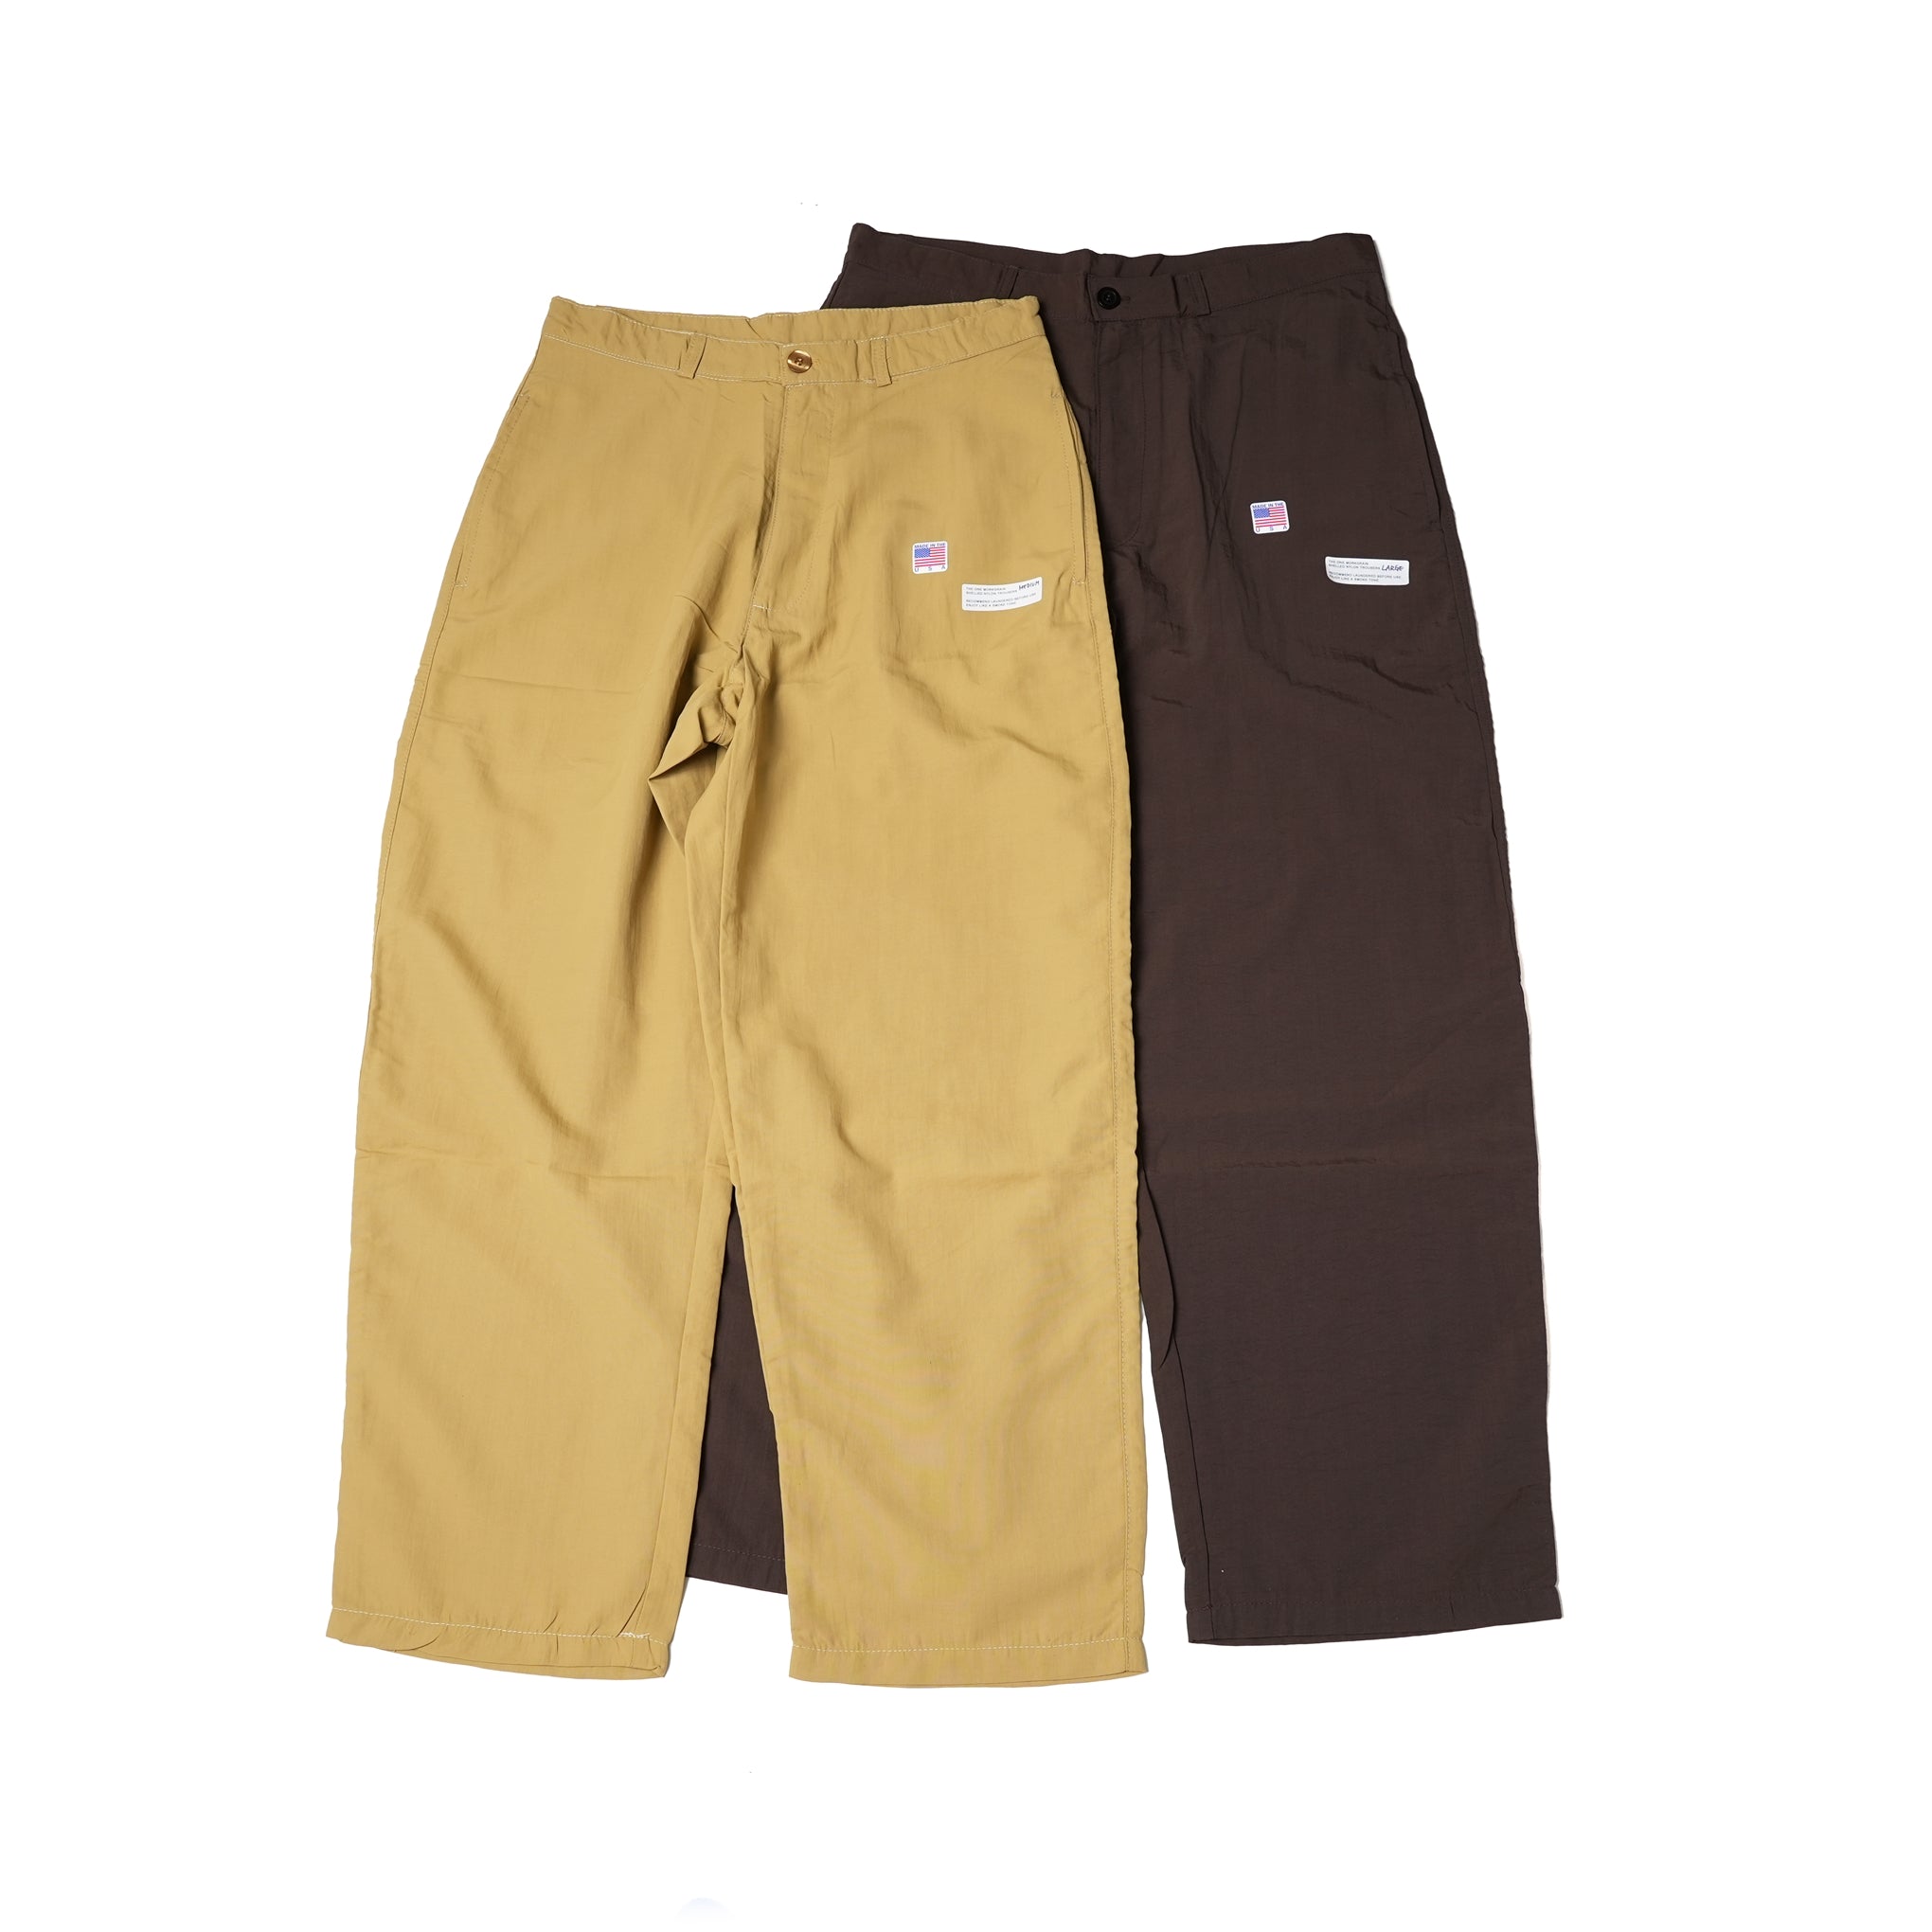 Name:SHELLED NYLON  TROUSERS_MORKGRAIN GARMENTS | Color:BROWN/BEIGE | Size:M/L | 【SMOKE T ONE】【DG THE DRY GOODS】